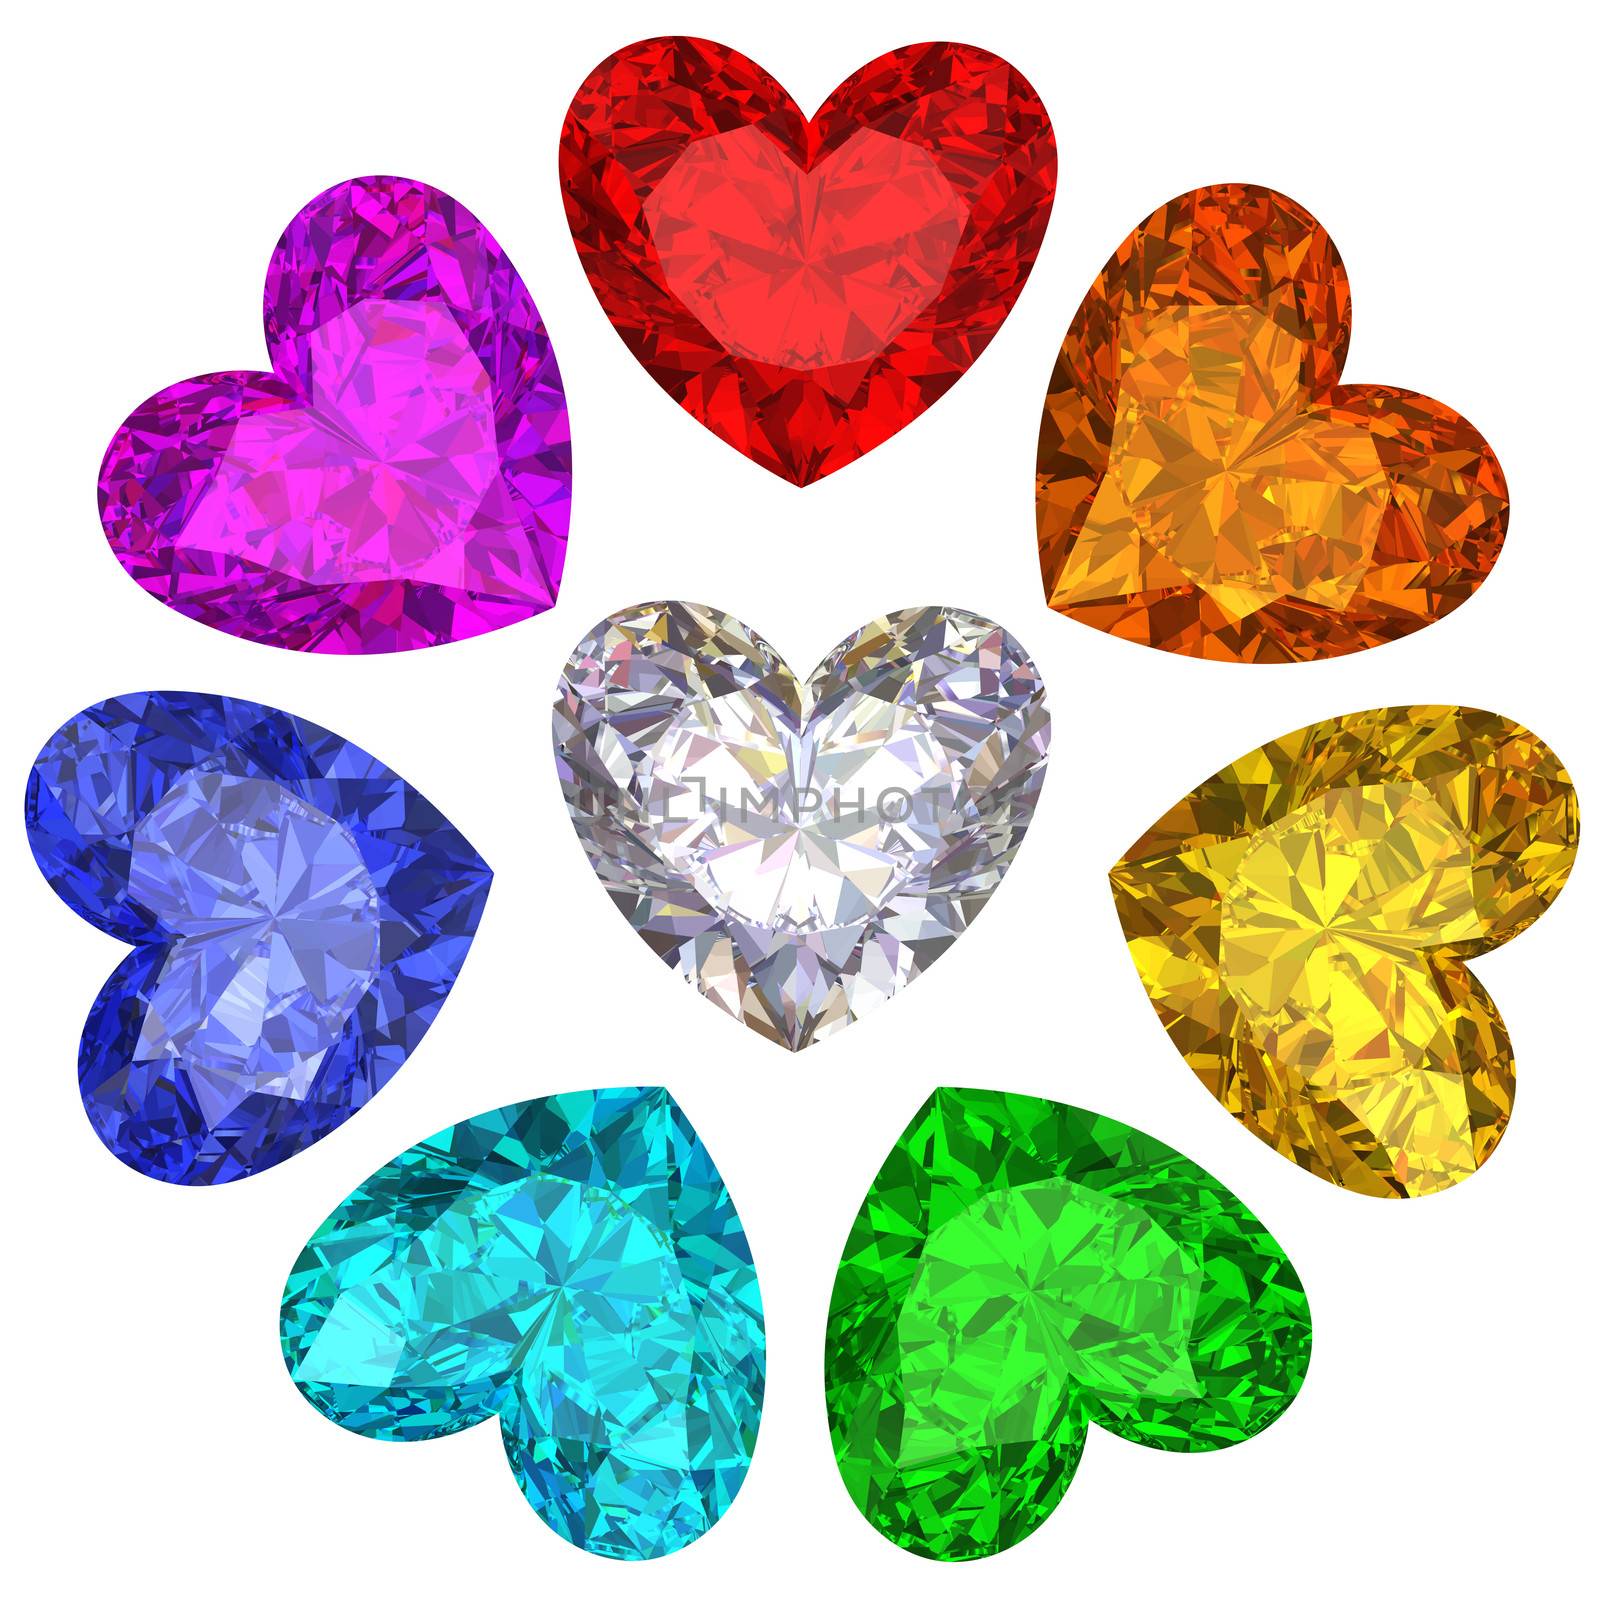 Colorful gems in shape of heart isolated on white by oneo